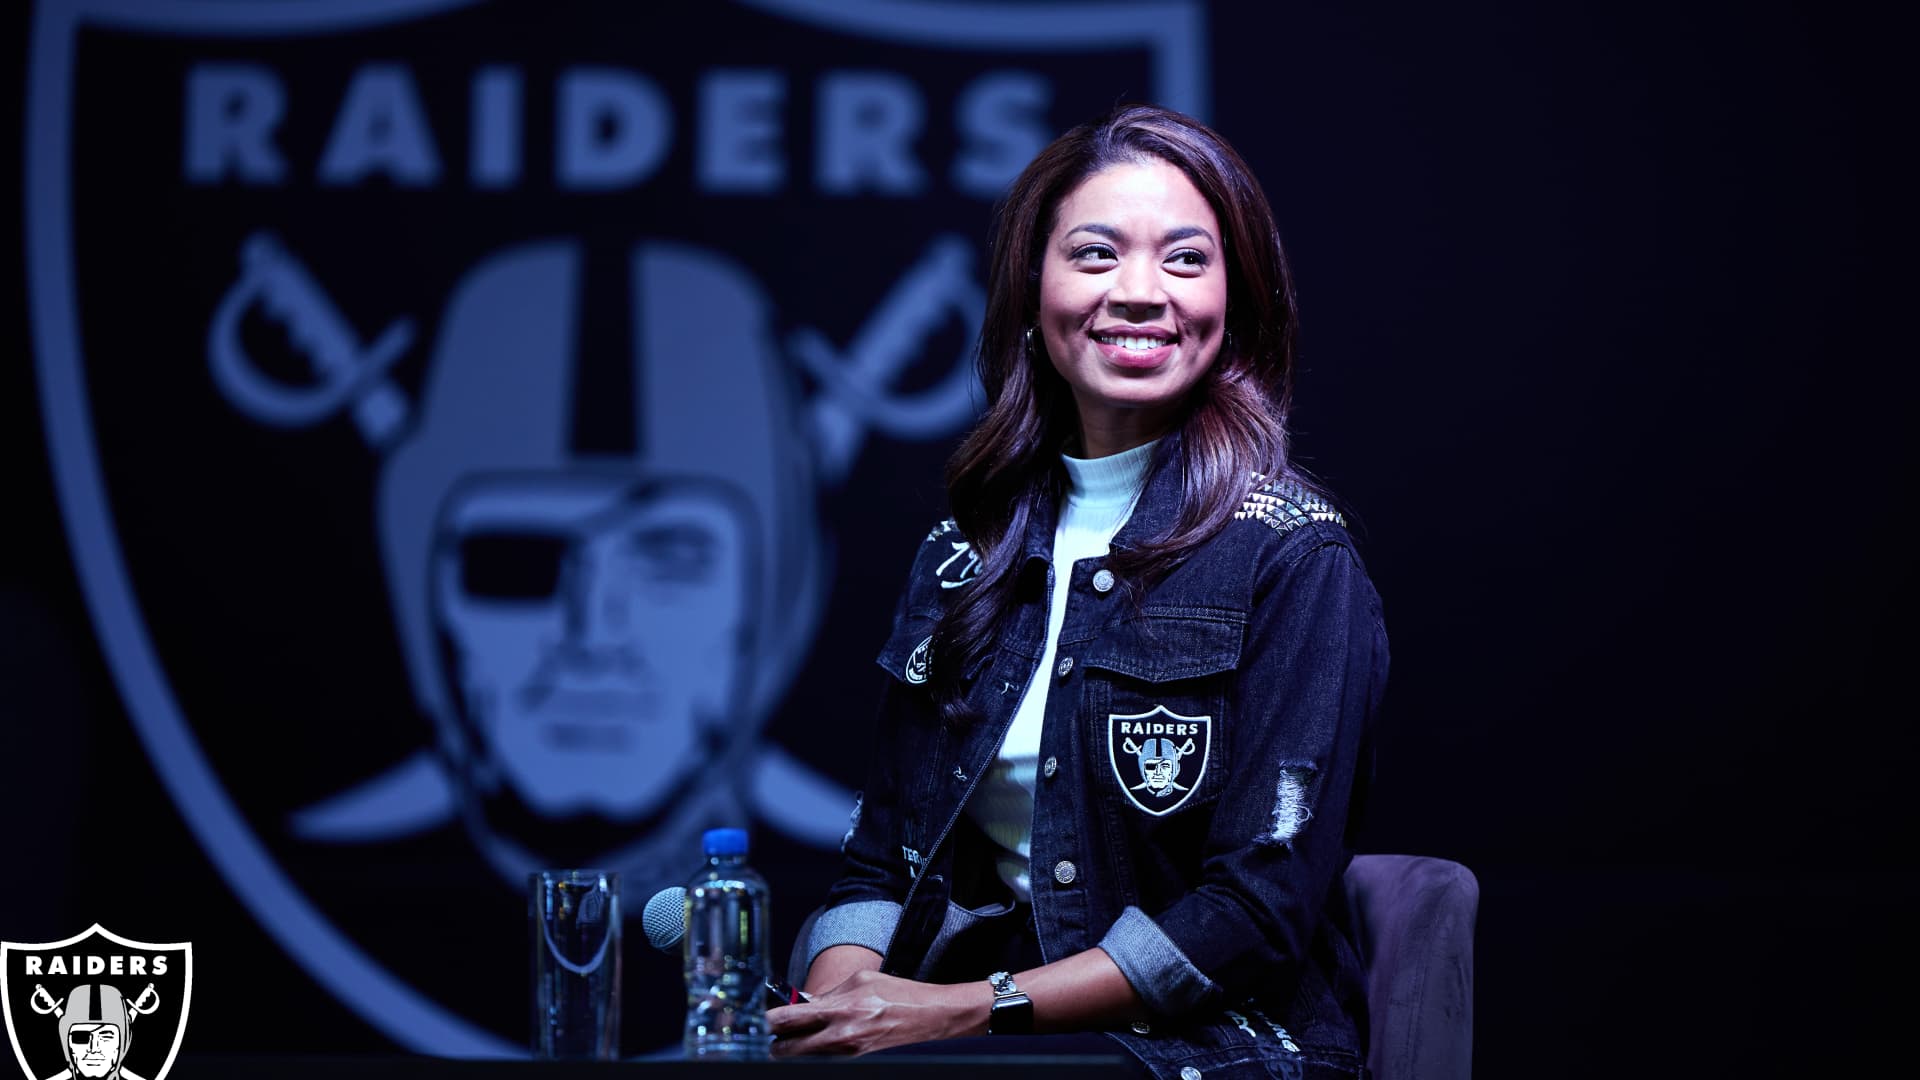 Sandra Douglass Morgan helped shape sports betting around the country. Now she’s leading the NFL’s Raiders